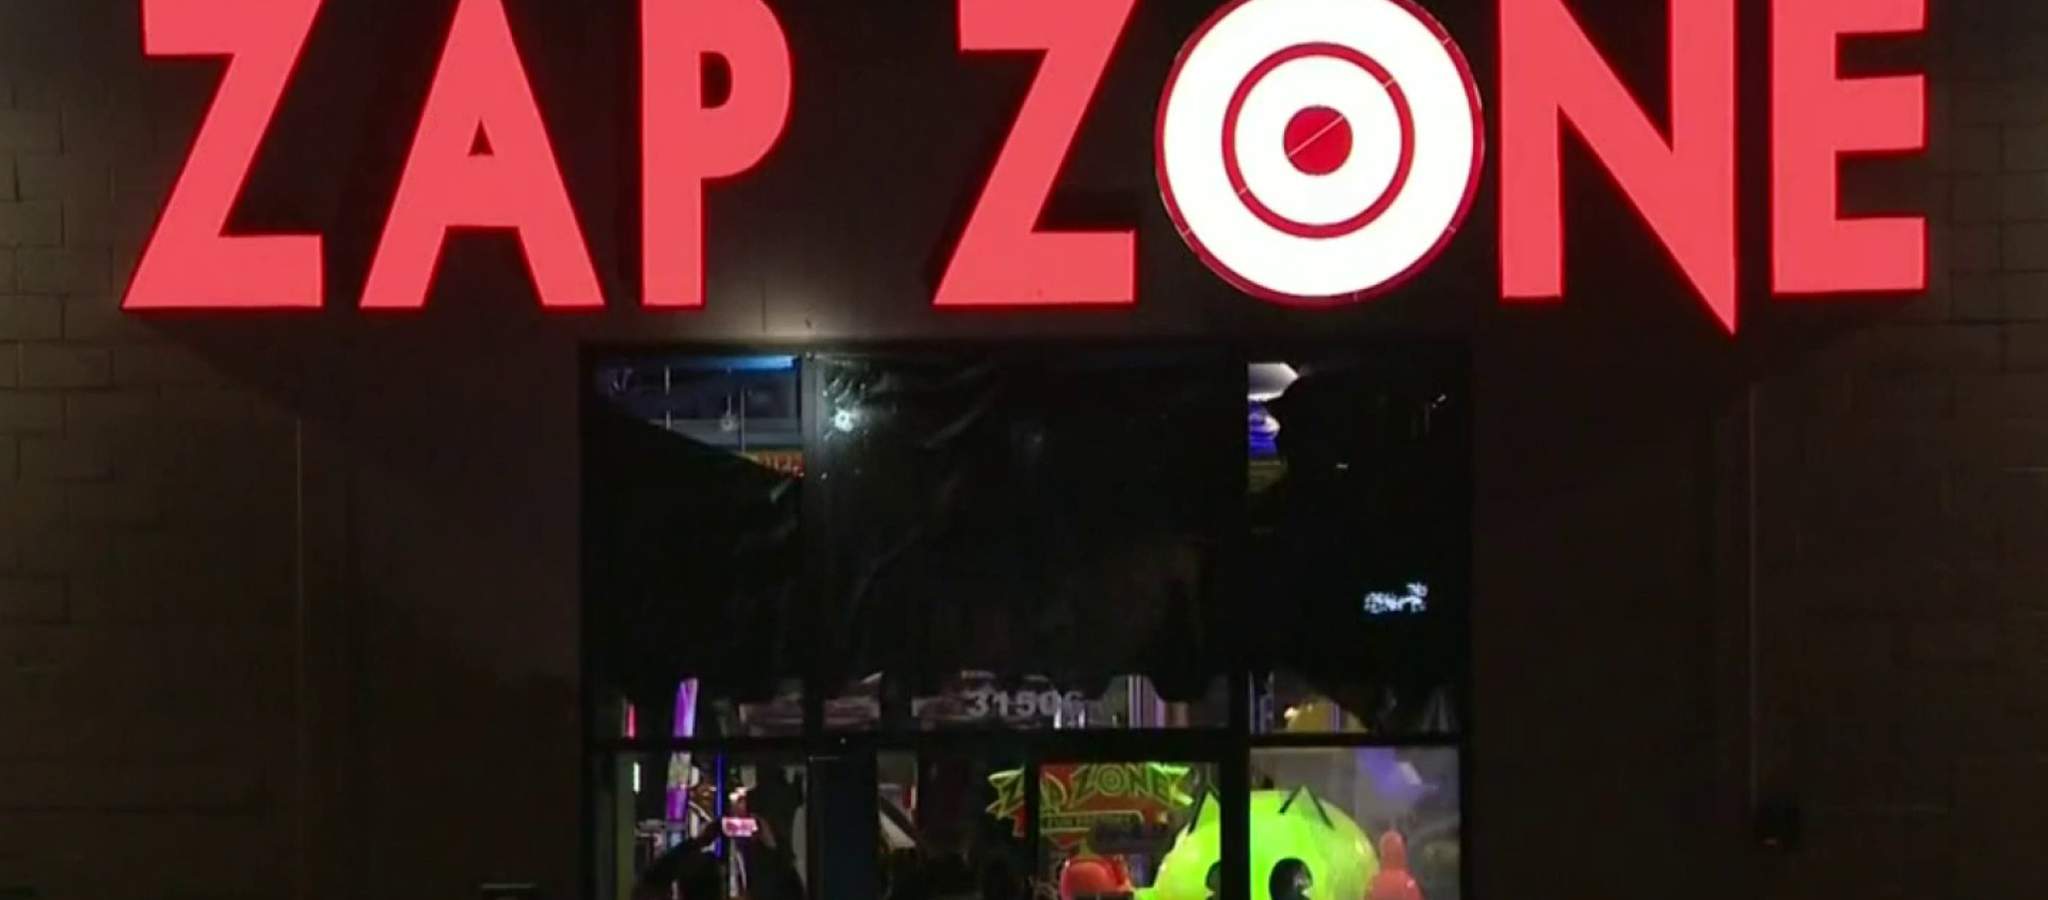 3 charged in connection with Farmington Zap Zone shooting